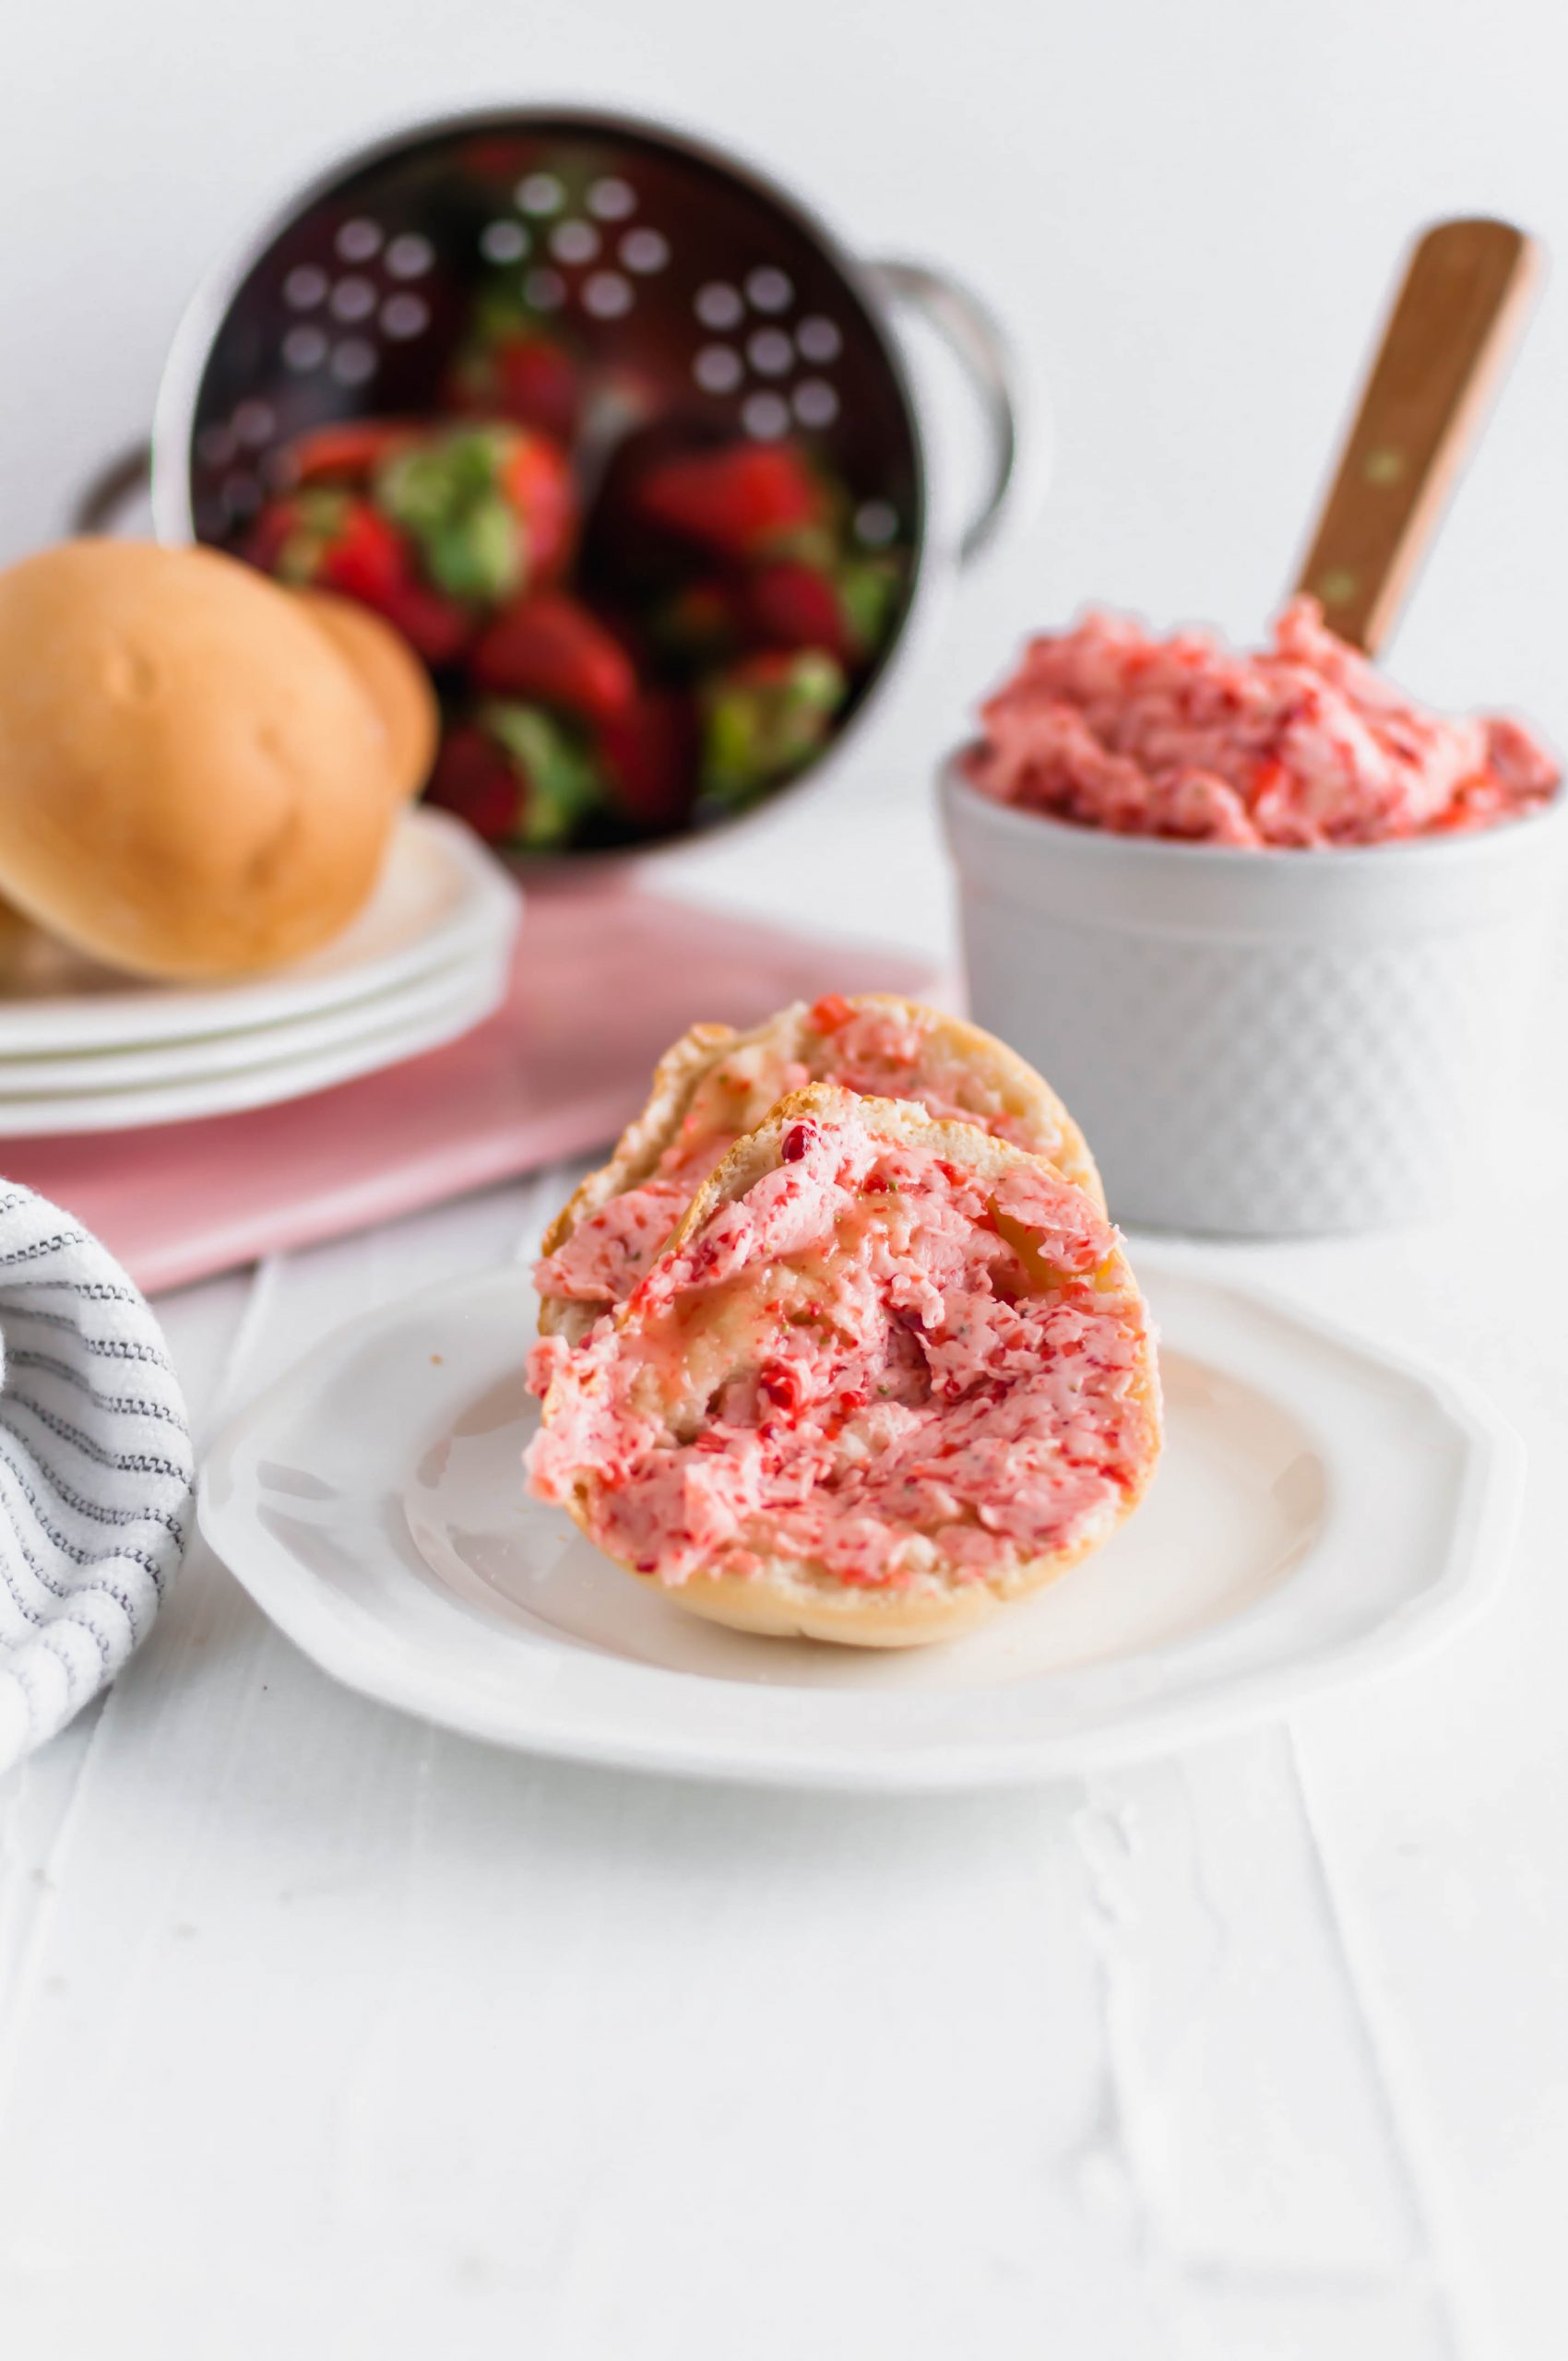 Whip up this sweet and simple strawberry butter for your homemade rolls, biscuits, toast and more. All you need is 3 simple ingredients and a few minutes.